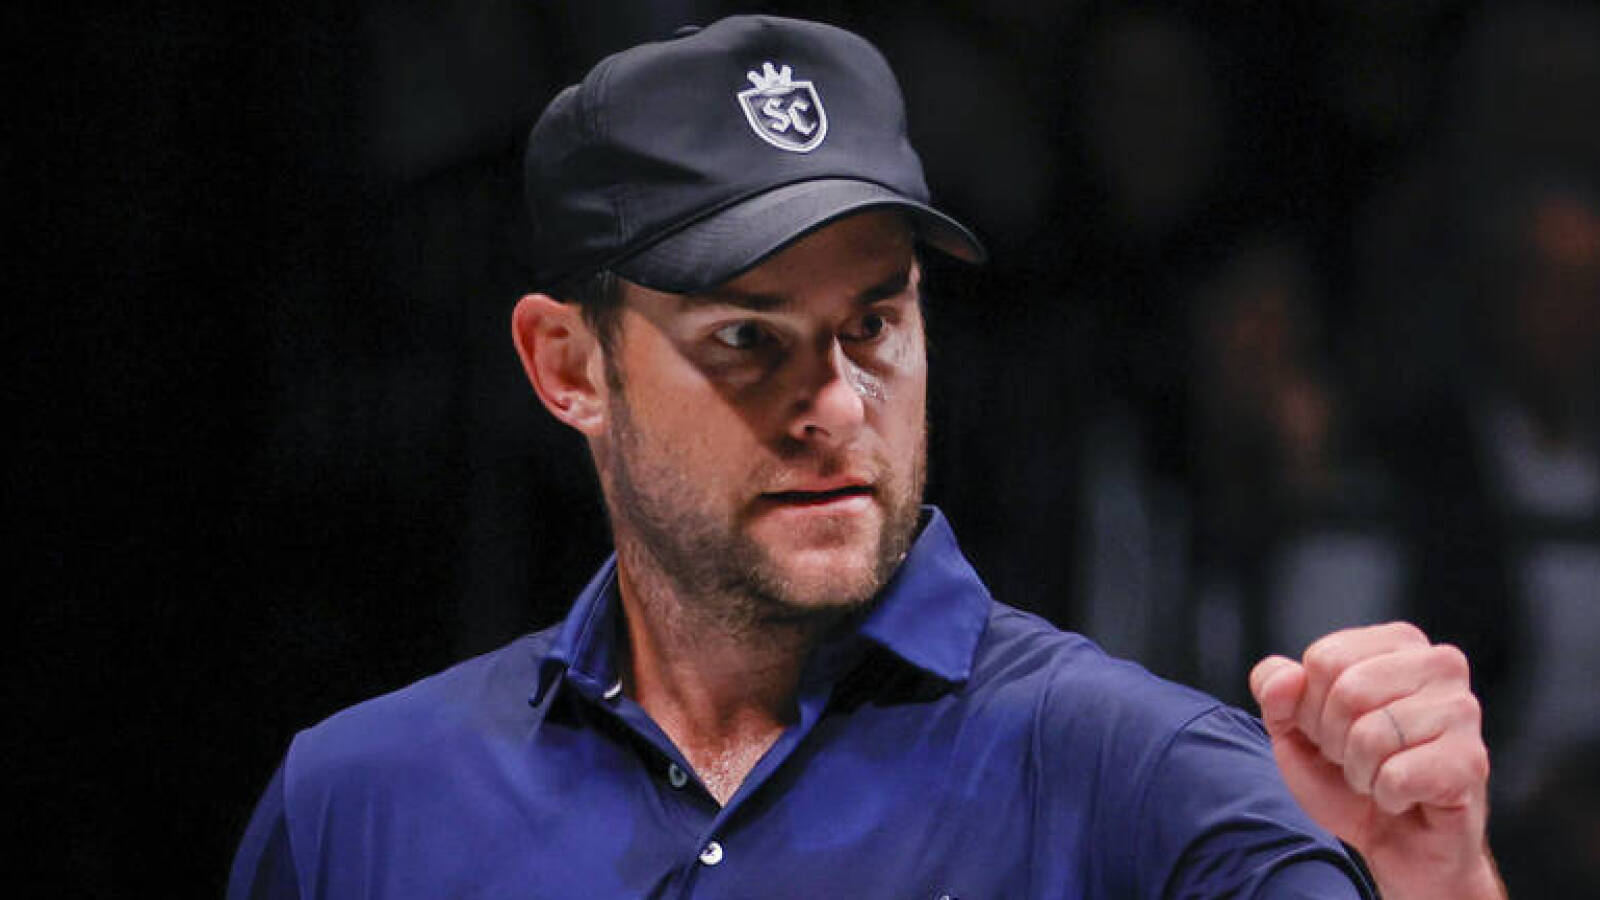 'One of the greatest tragedies of sport,' Andy Roddick serves some tough pills with Jon Wertheim as Rafael Nadal fails to ‘author his own ending’ with staggering physical hurdles